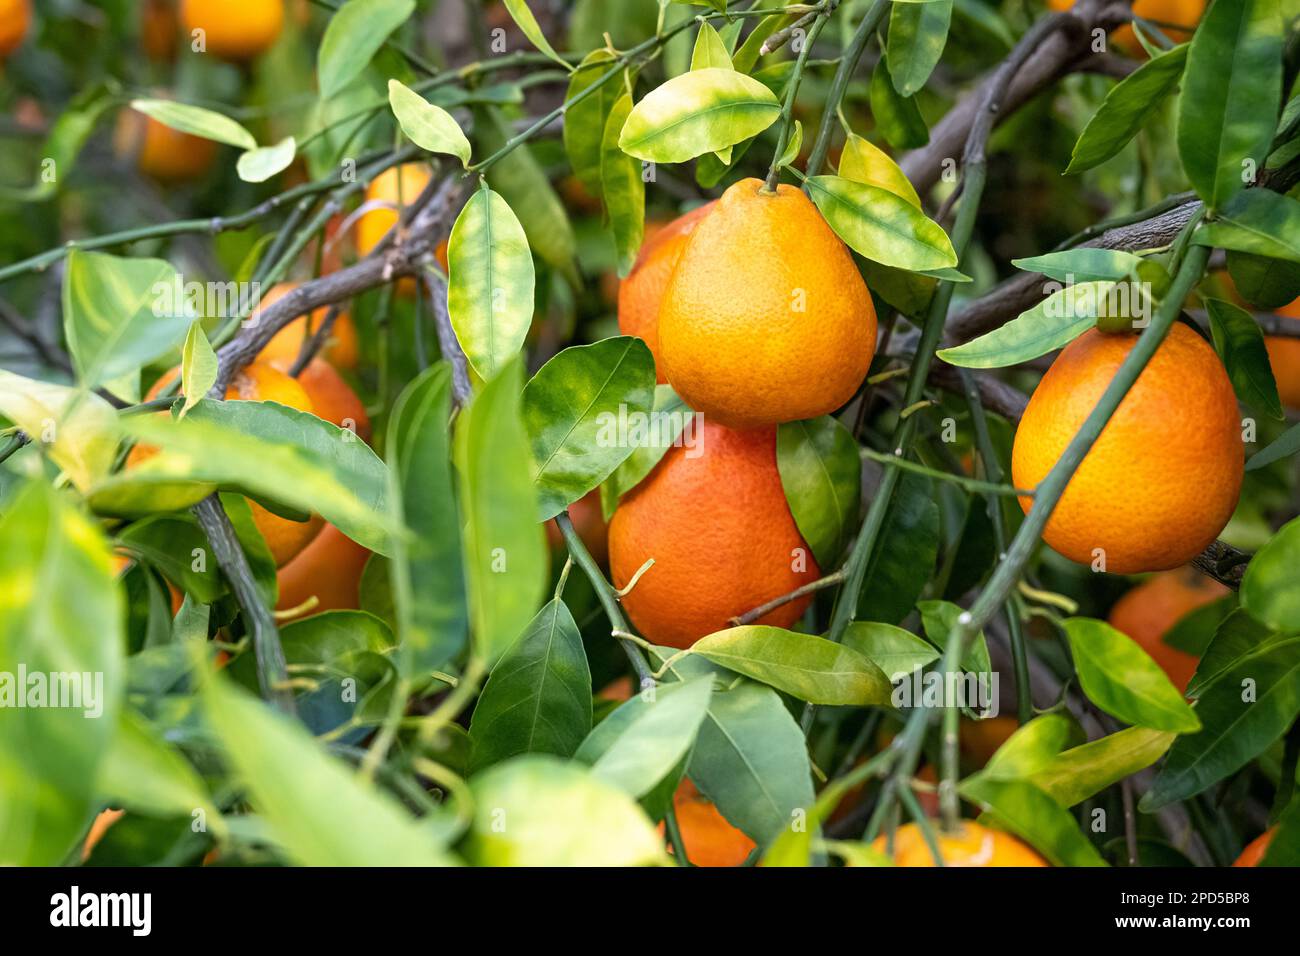 Ripe u-pick sugar bell oranges at the Showcase of Citrus grove in Clermont, Florida. (USA) Stock Photo